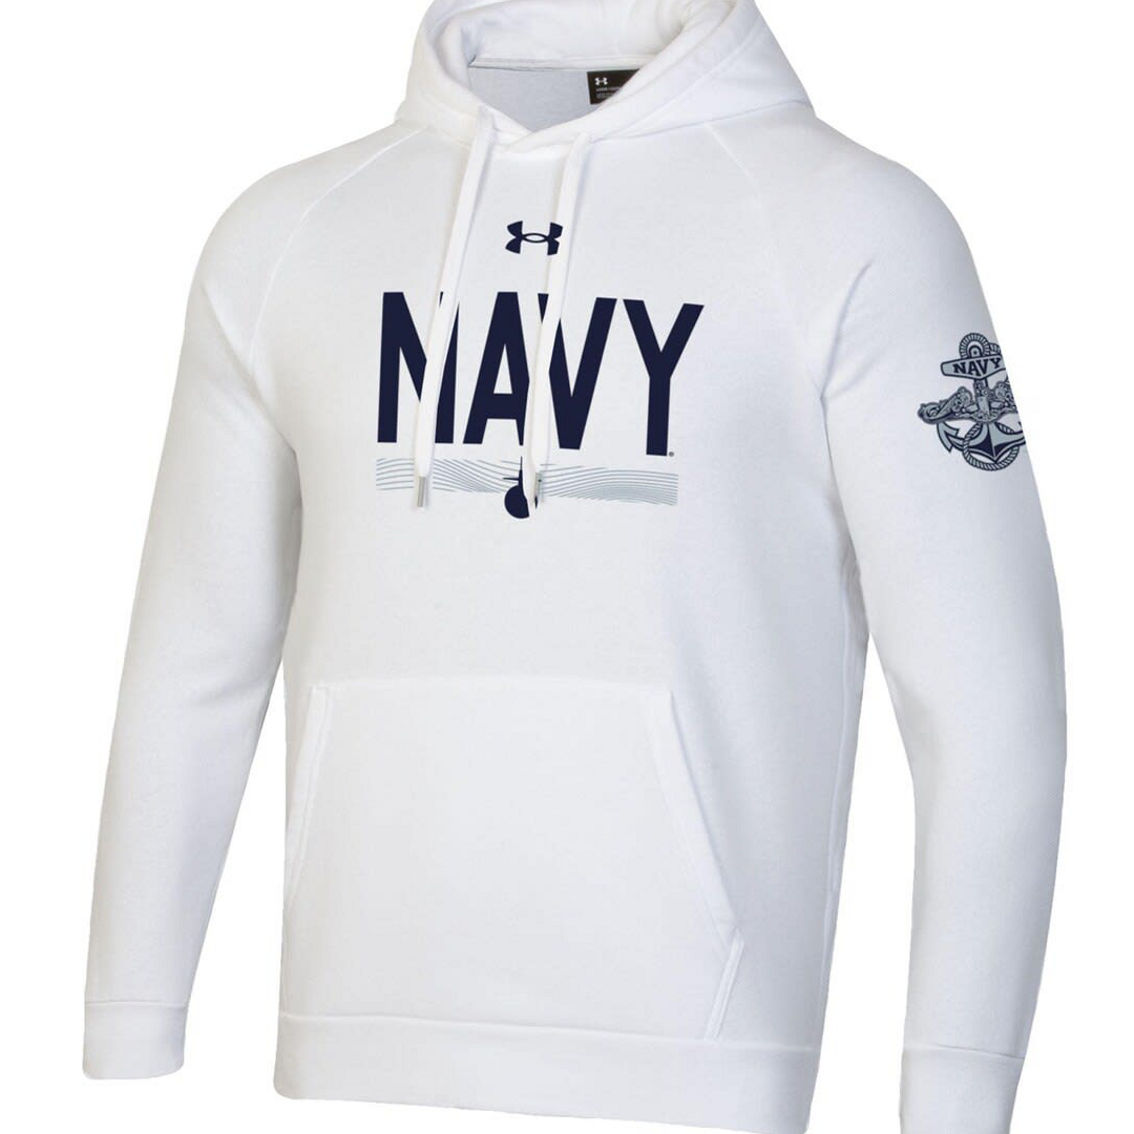 Under Armour Men's White Navy Midshipmen Silent Service All Day Pullover Hoodie - Image 3 of 4